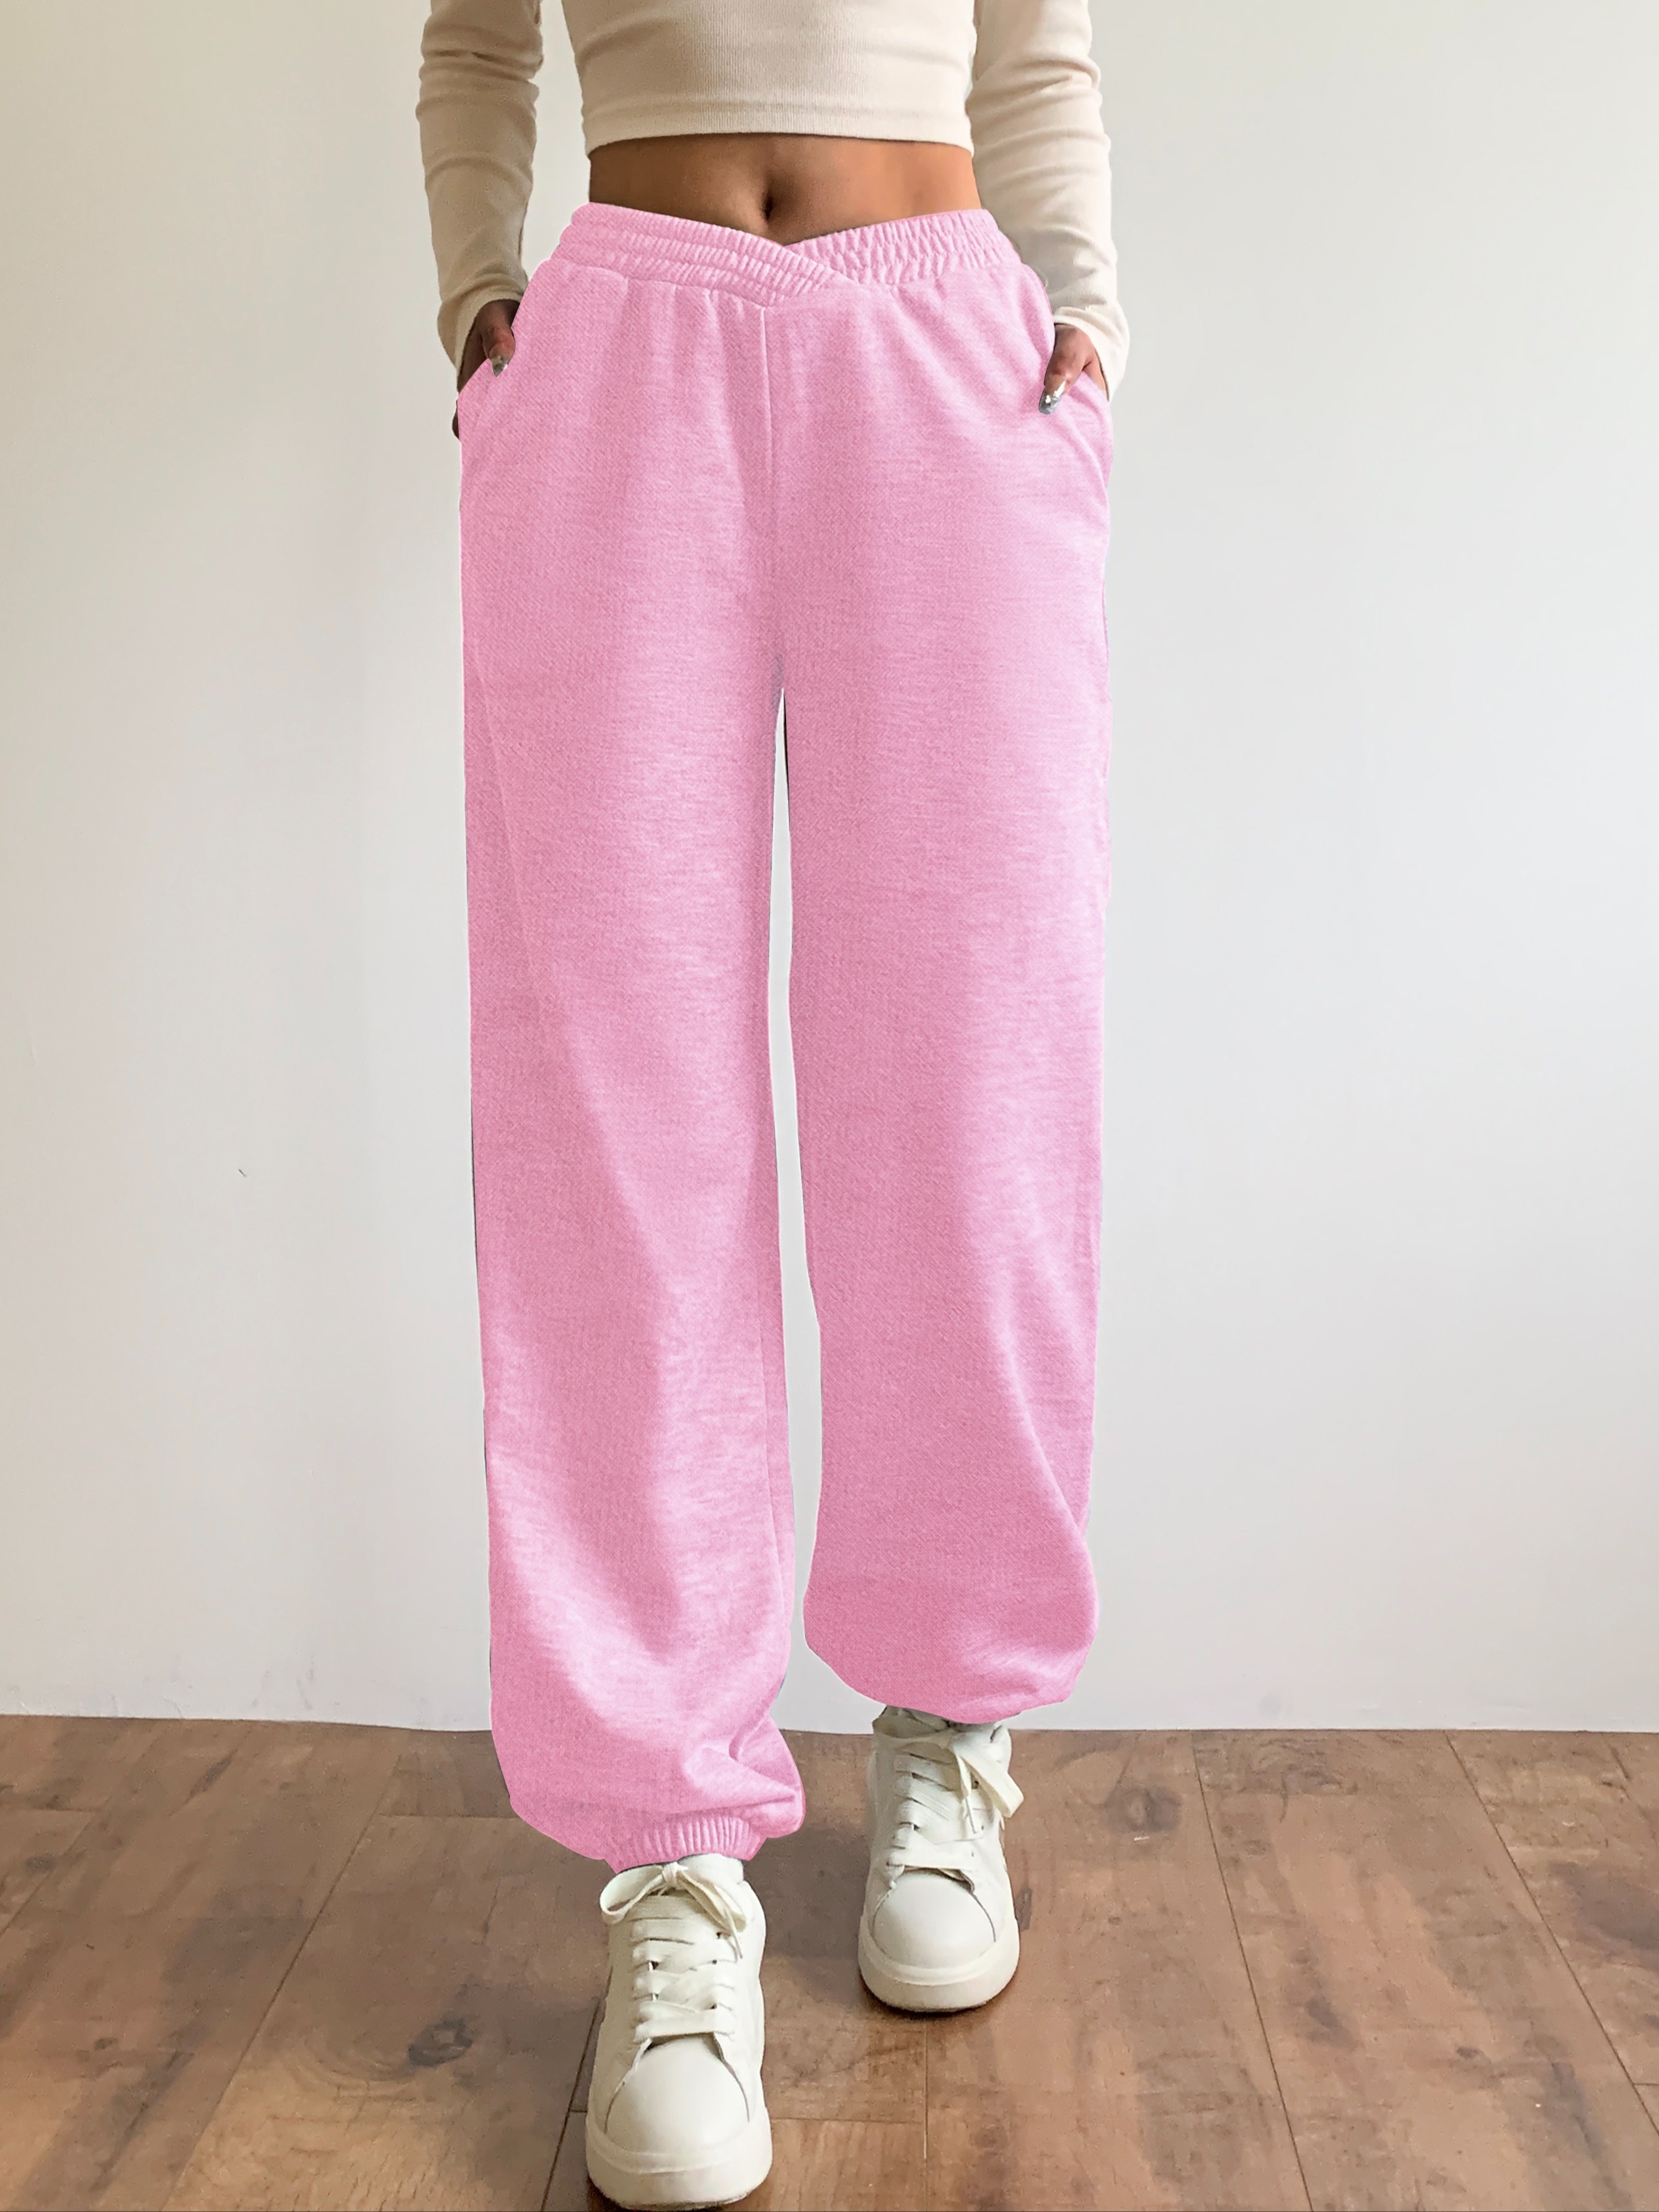 ti1684473016tl0731460a8a5ce1626210cbf4385ae0ef  Rosa sweatpants, Pants for  women, Womens casual outfits